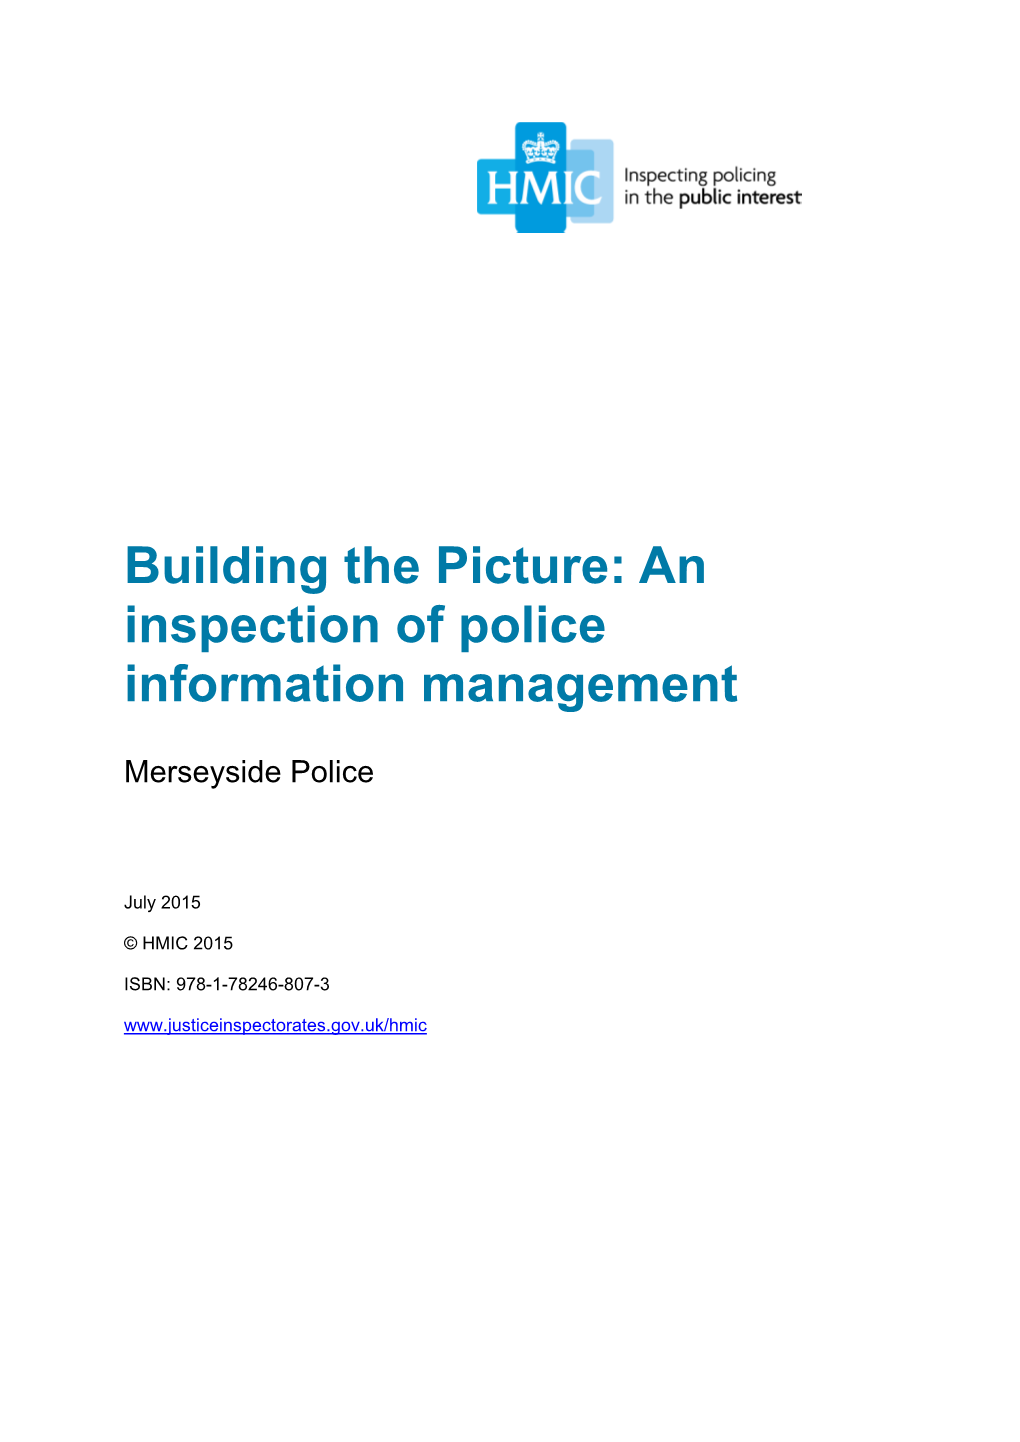 Building the Picture: an Inspection of Police Information Management